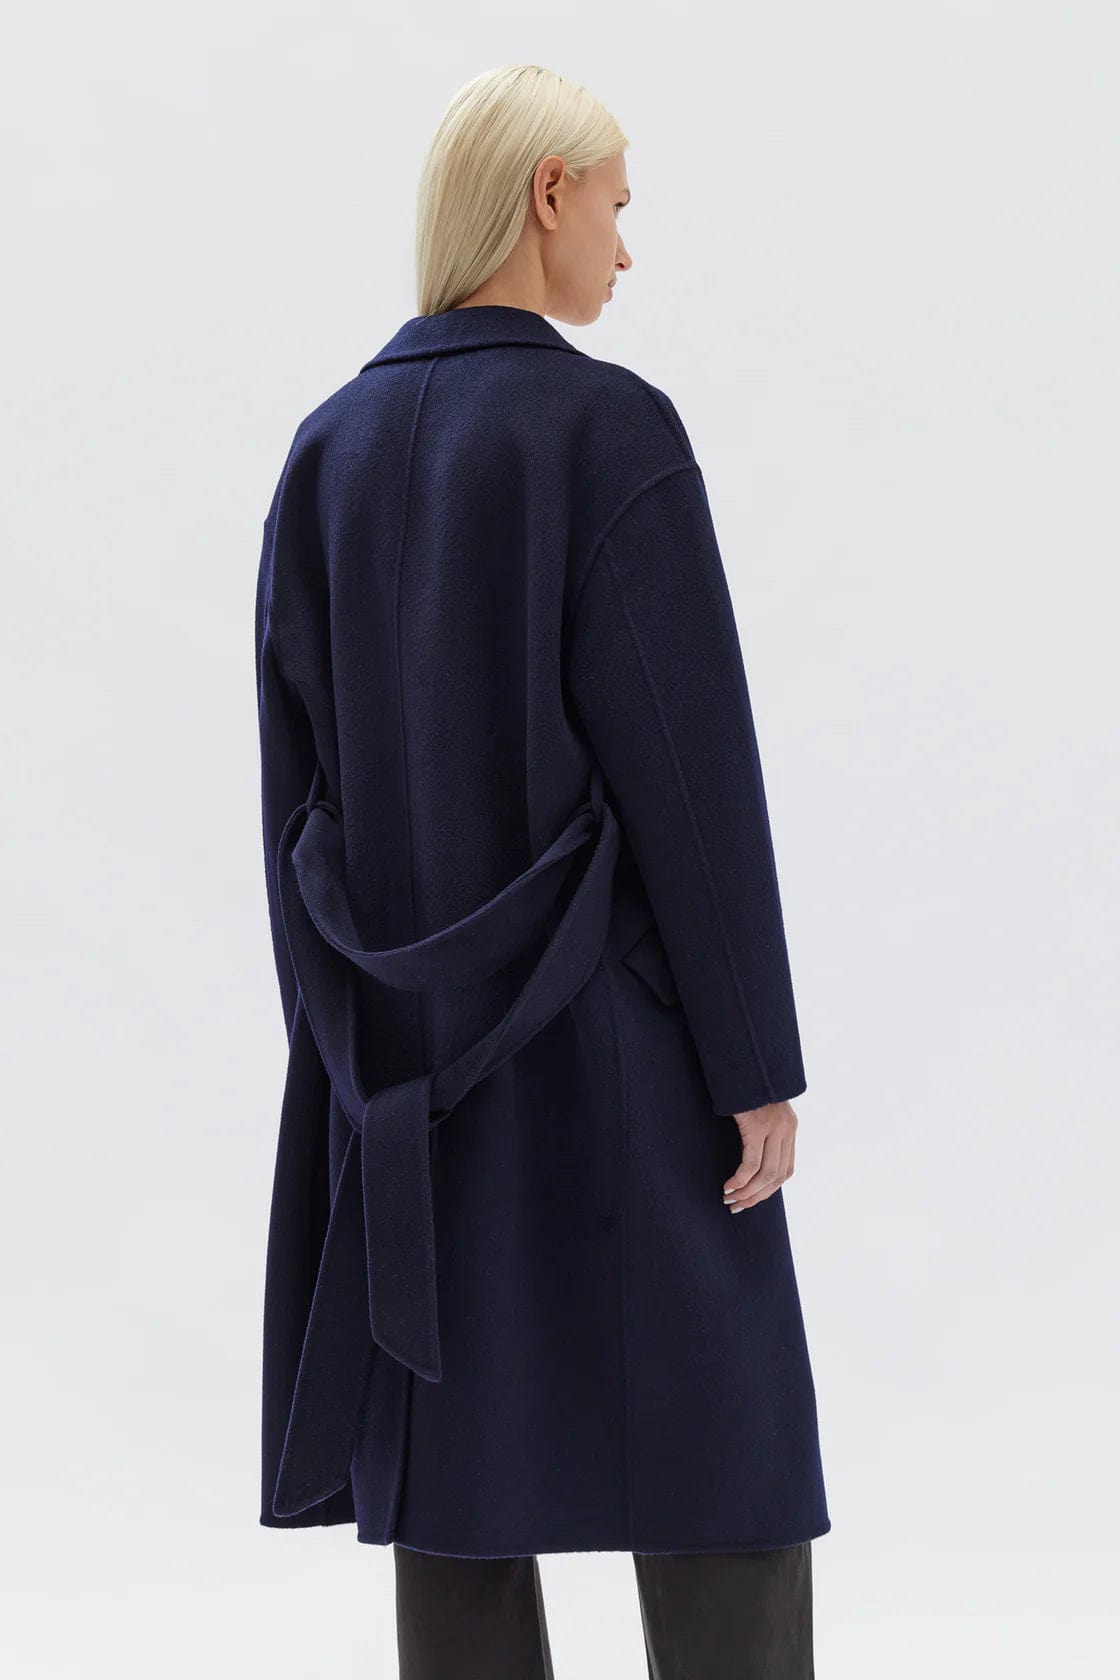 Assembly Label Coats - Wool Assembly Label | Sadie Single Breasted Wool Coat - Ink